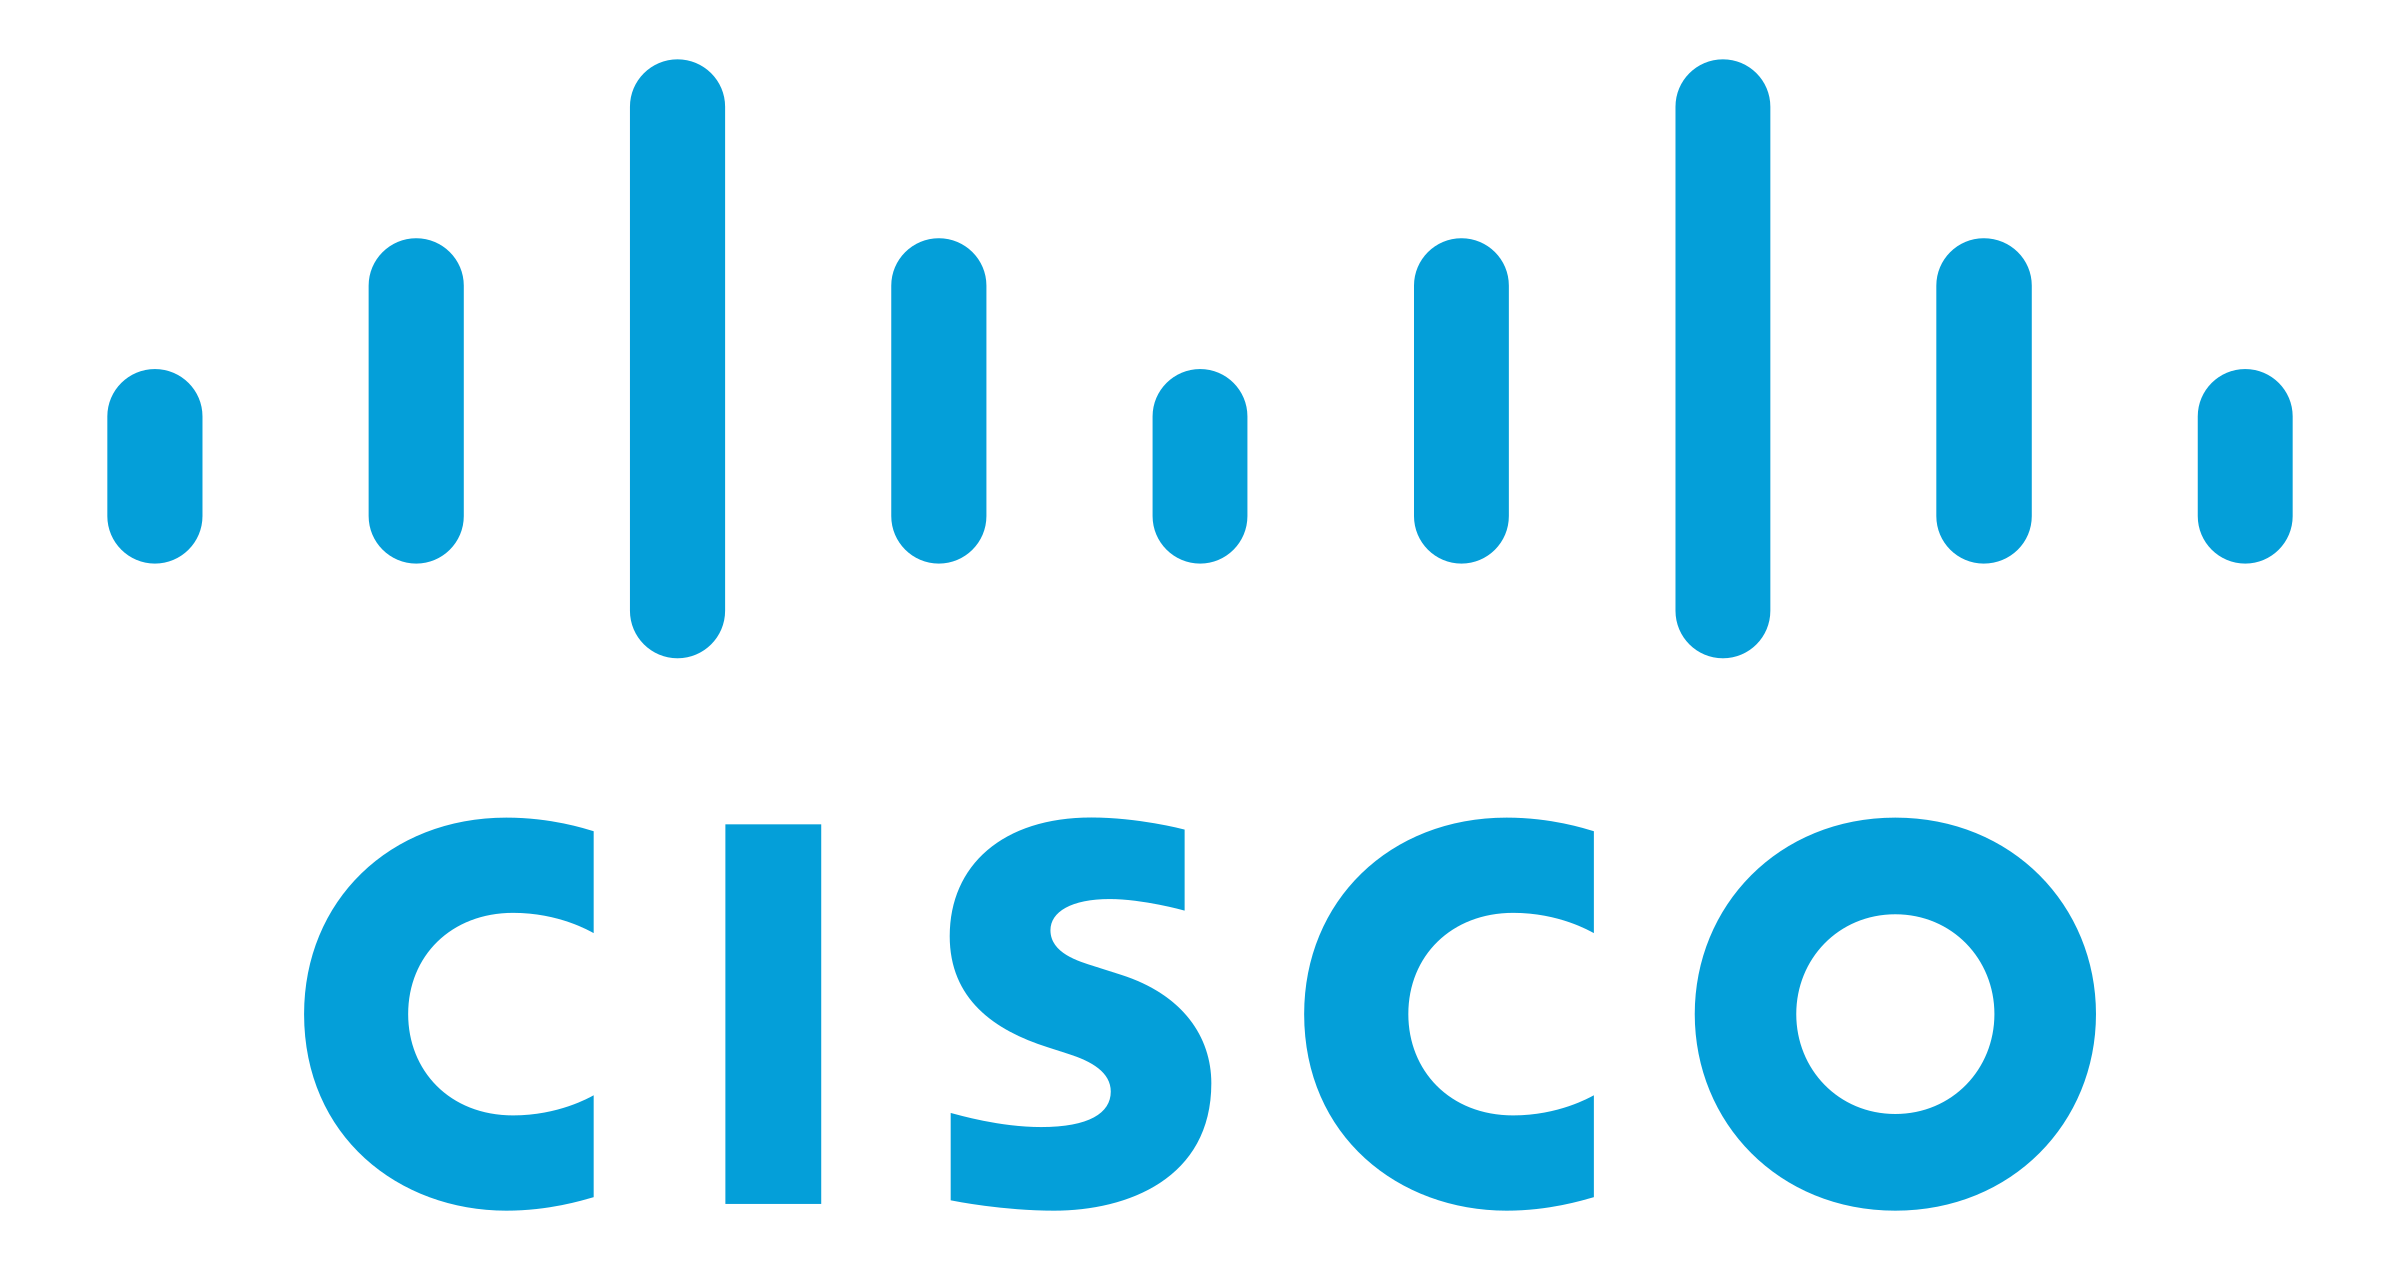 Cisco is looking for data science analyst interns | apply now